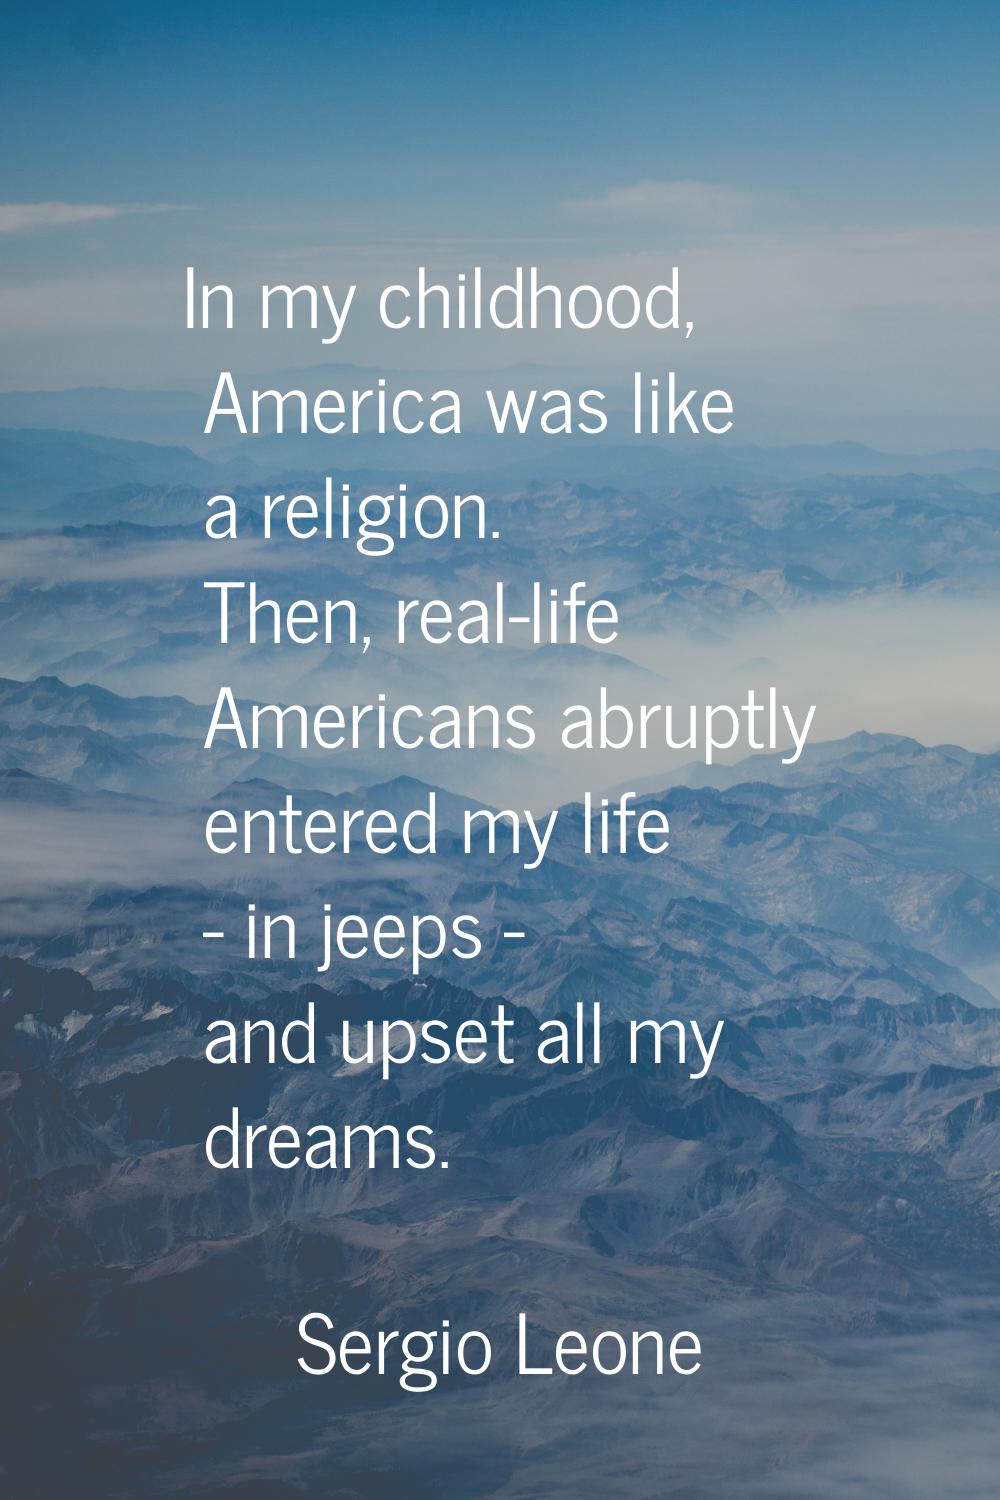 In my childhood, America was like a religion. Then, real-life Americans abruptly entered my life - 